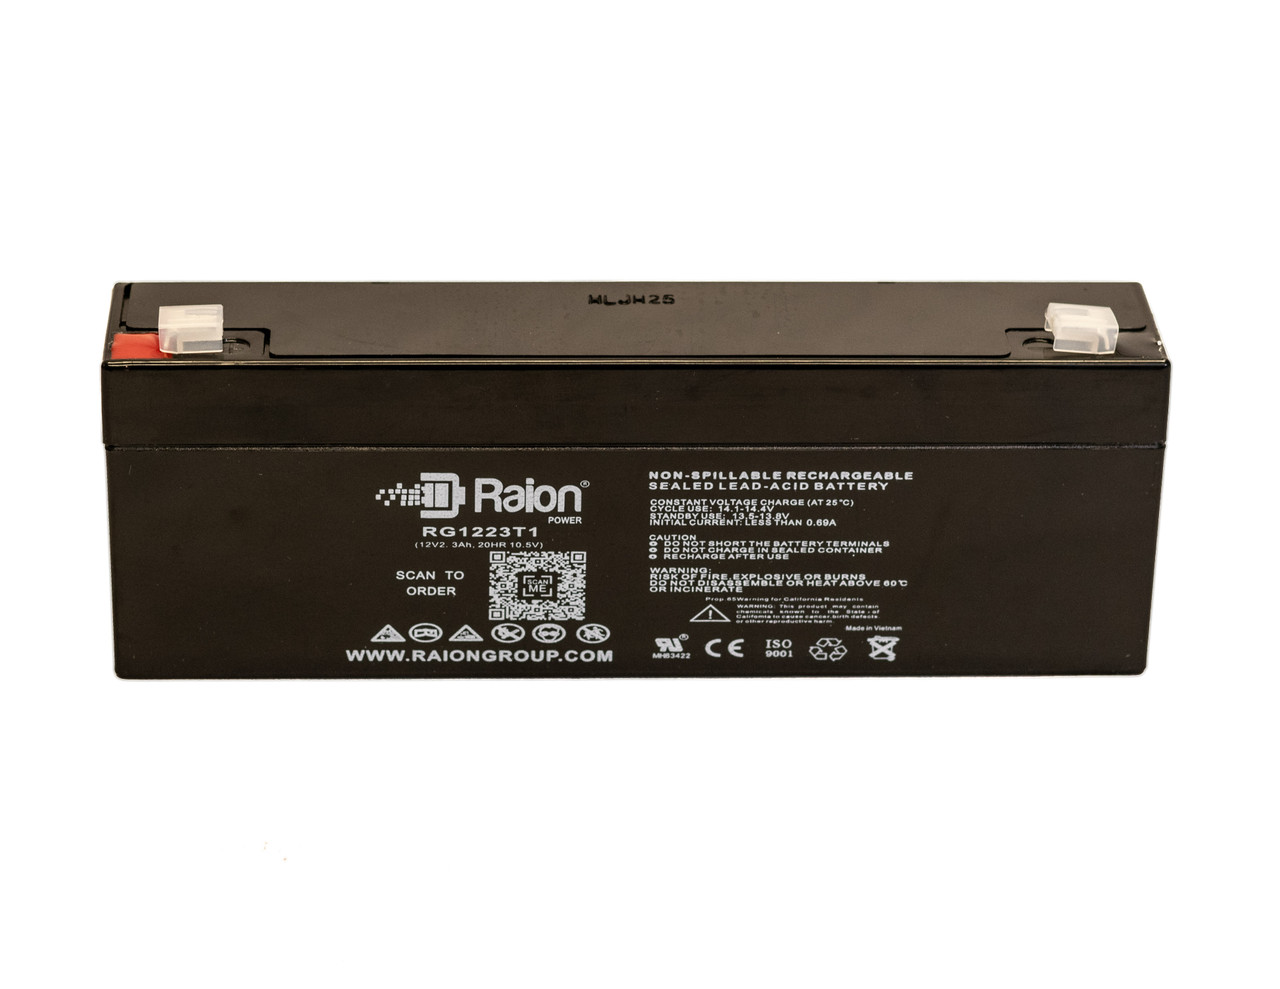 Raion Power 12V 2.3Ah SLA Battery With T1 Terminals For Air Shields Medical N-15 Warm Weight Infant Scale